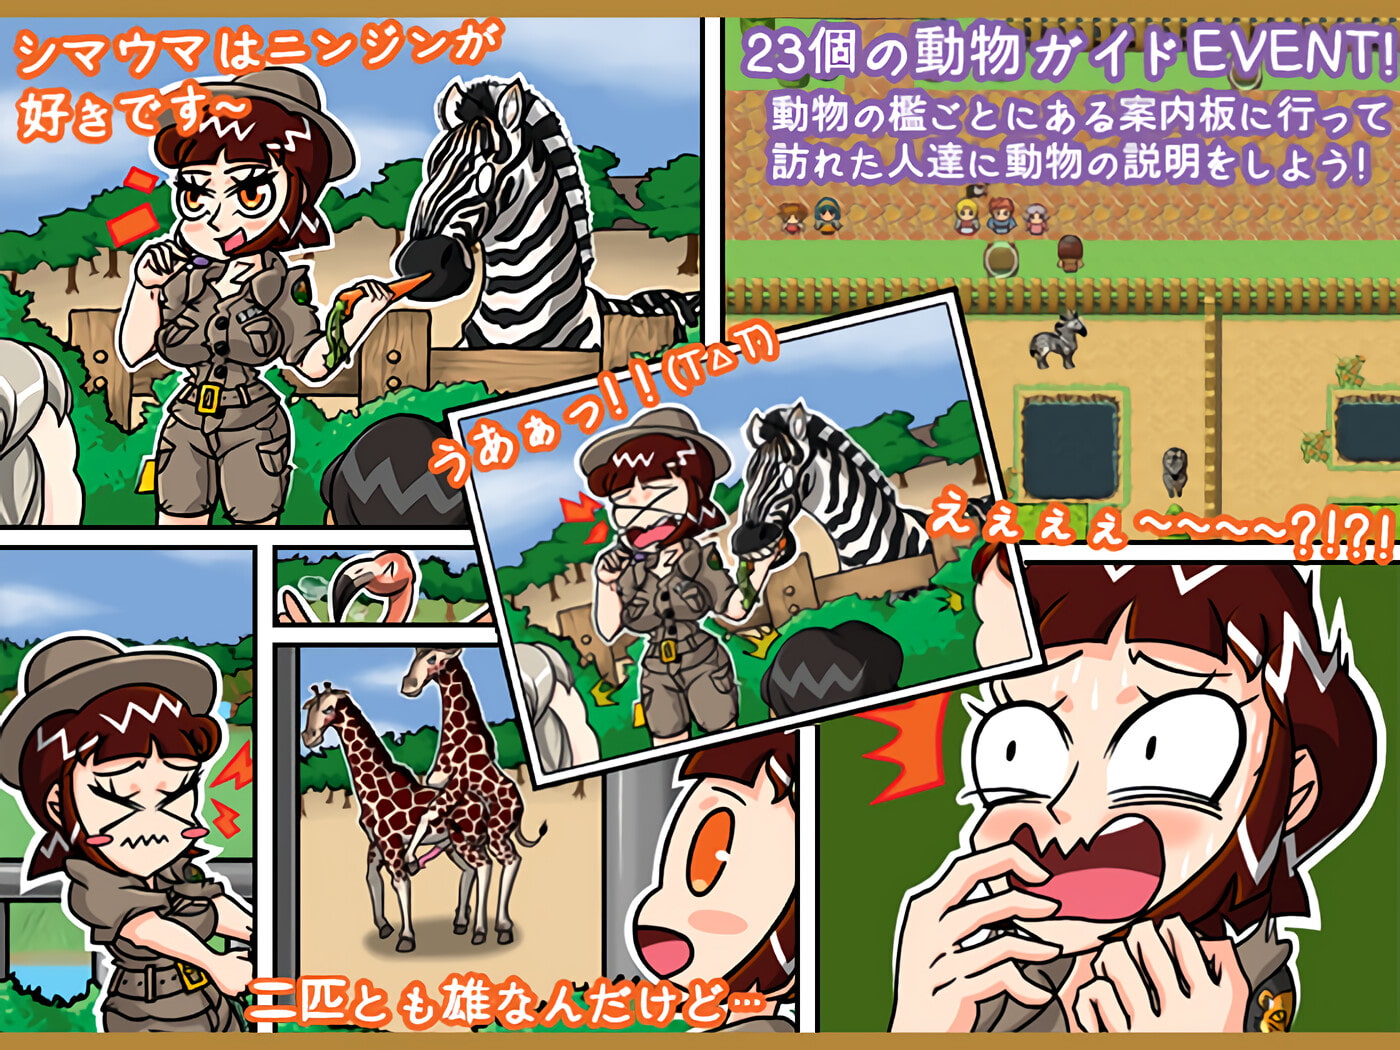 Zookeeper Mission! [Morning Explosion]